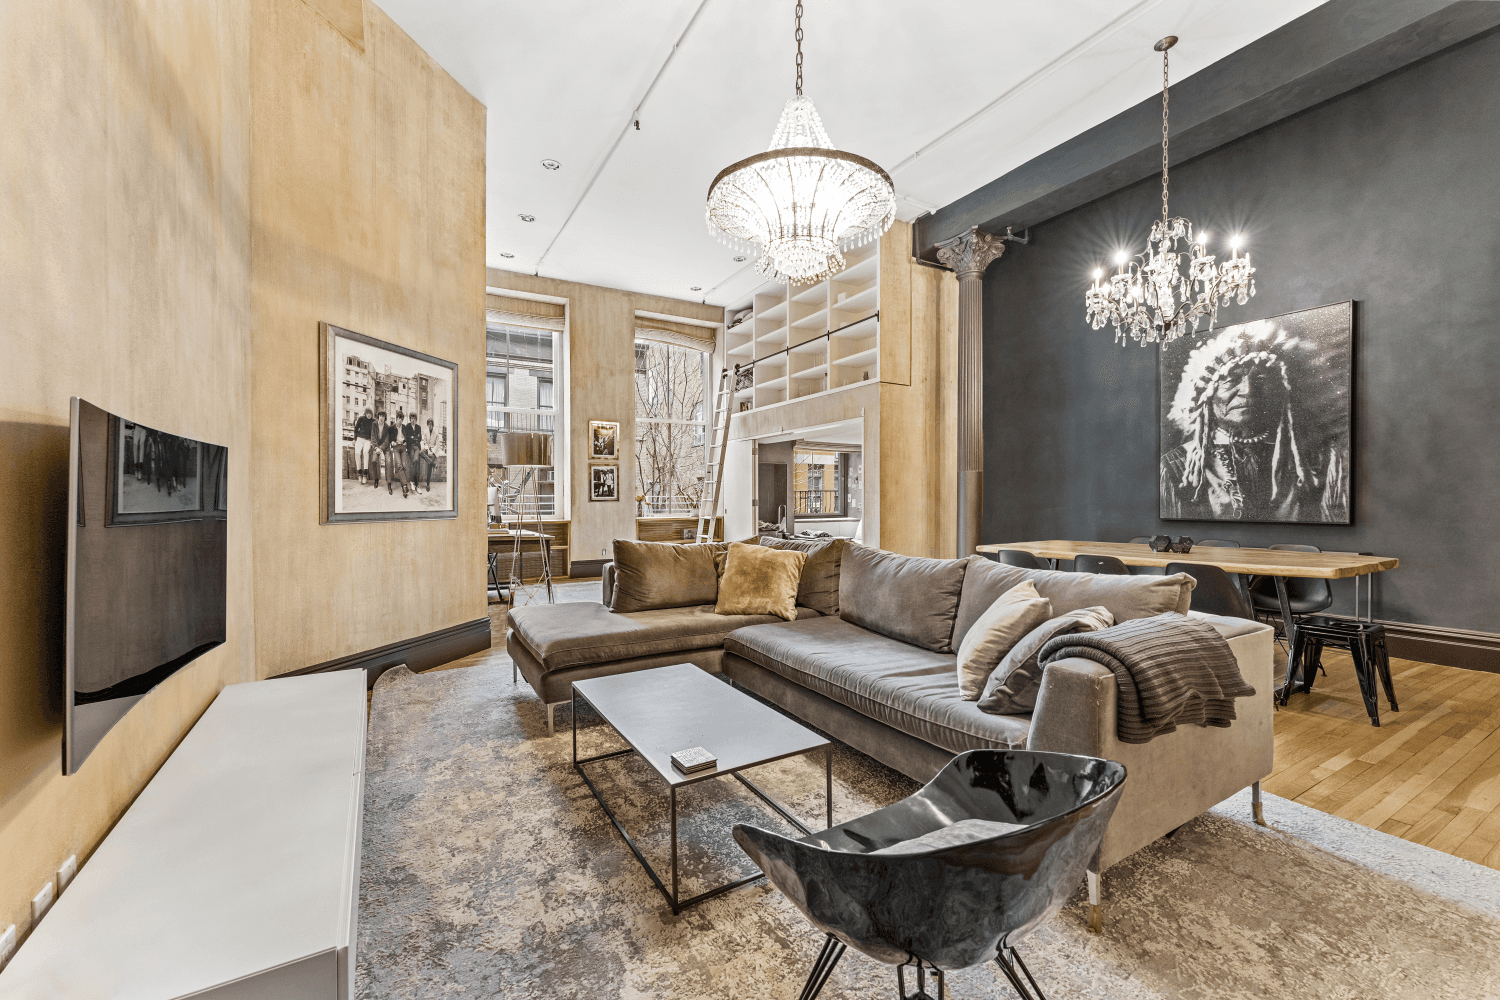 QUINTESSENTIAL CROSBY STREET LOFTClassic SoHo Loft Living Luxurious Residence with Modern Amenities in the Heart of Historic DistrictLocated amid world class restaurants and shops in Soho's Cast Iron Historic District, ...